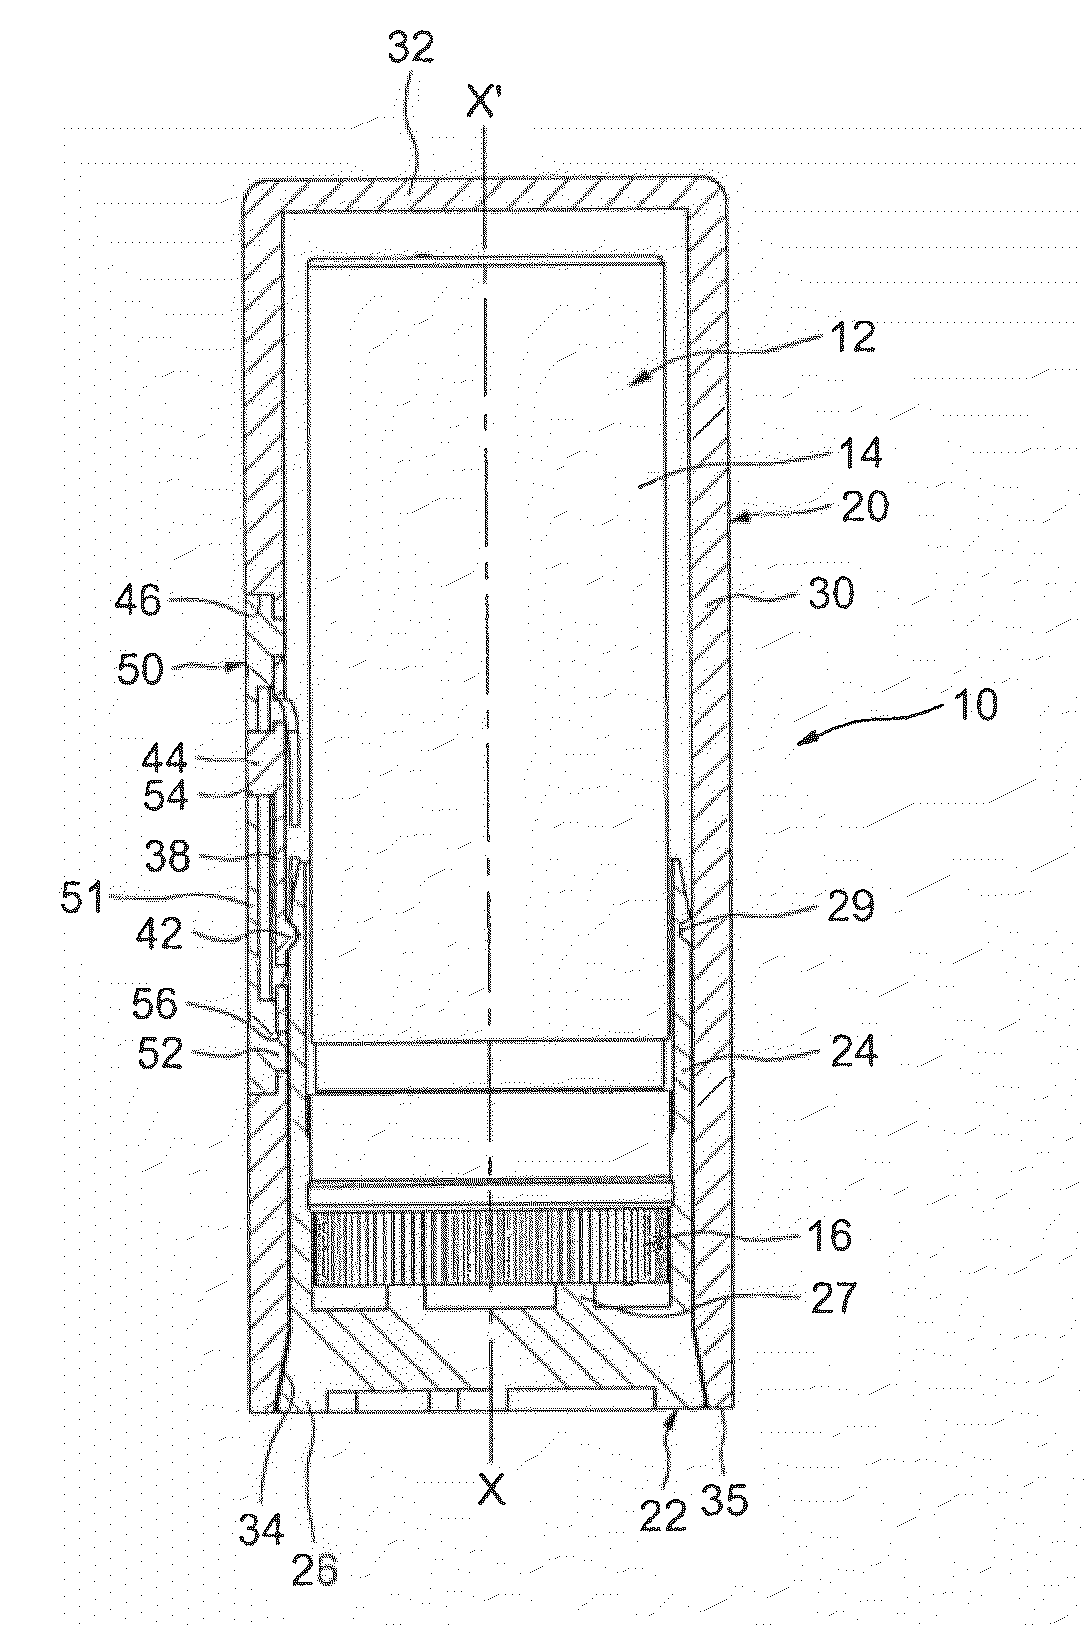 Protection device for a system for packaging a product, such as a cosmetic product